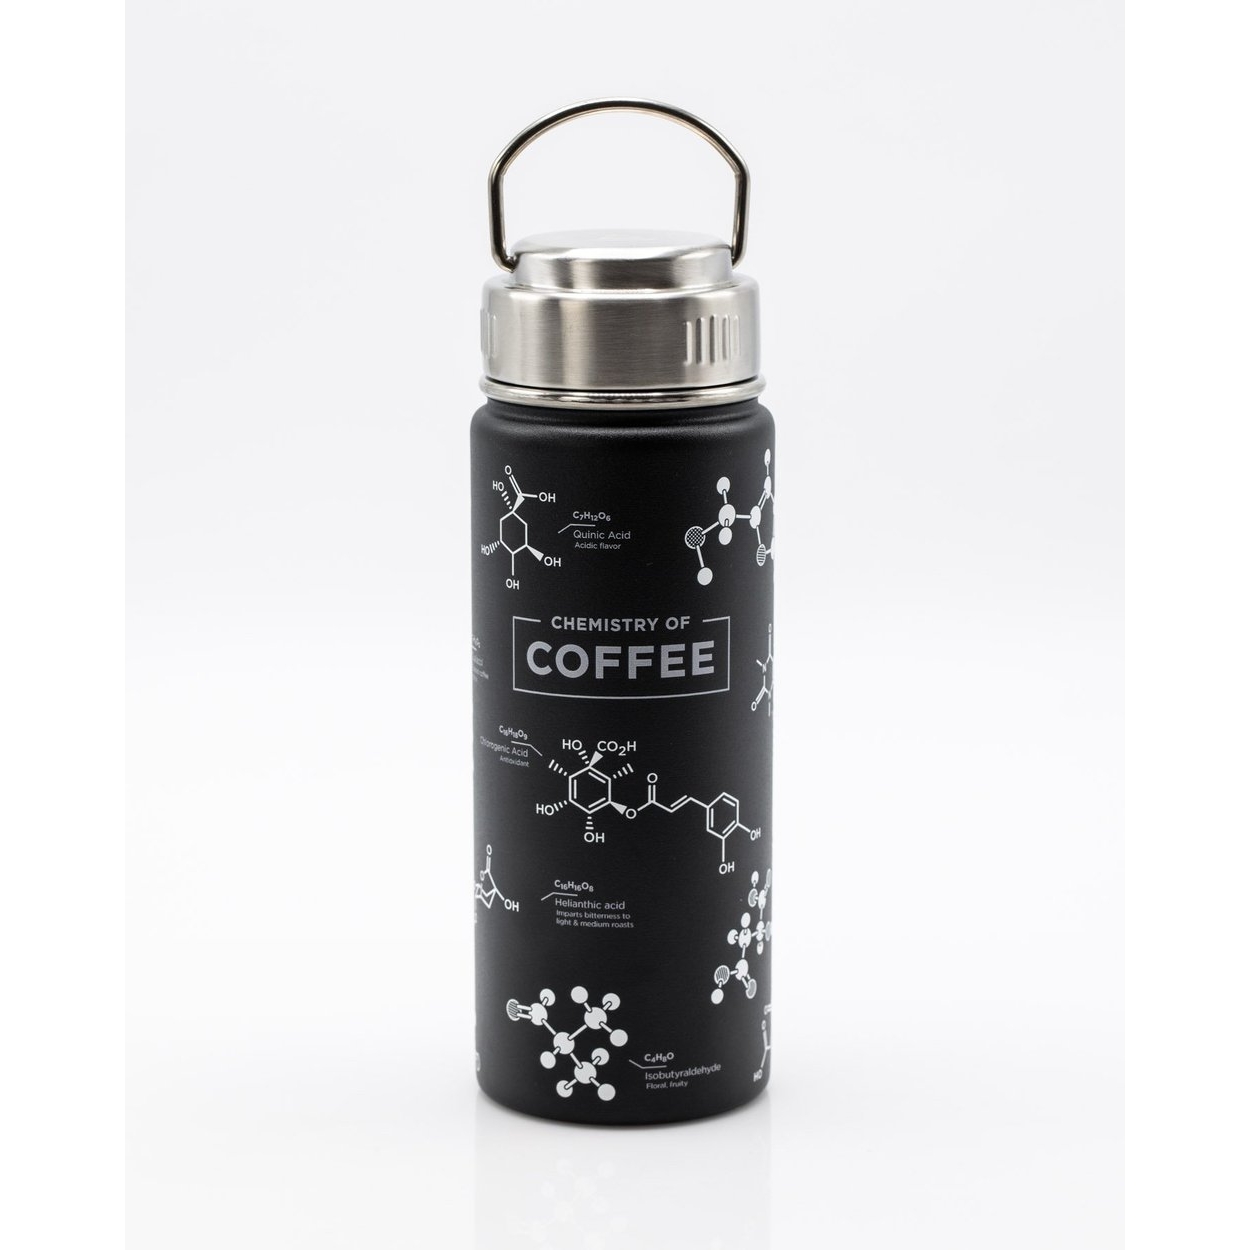 https://amse.org/wp-content/uploads/2021/09/Coffee-Flask.jpeg